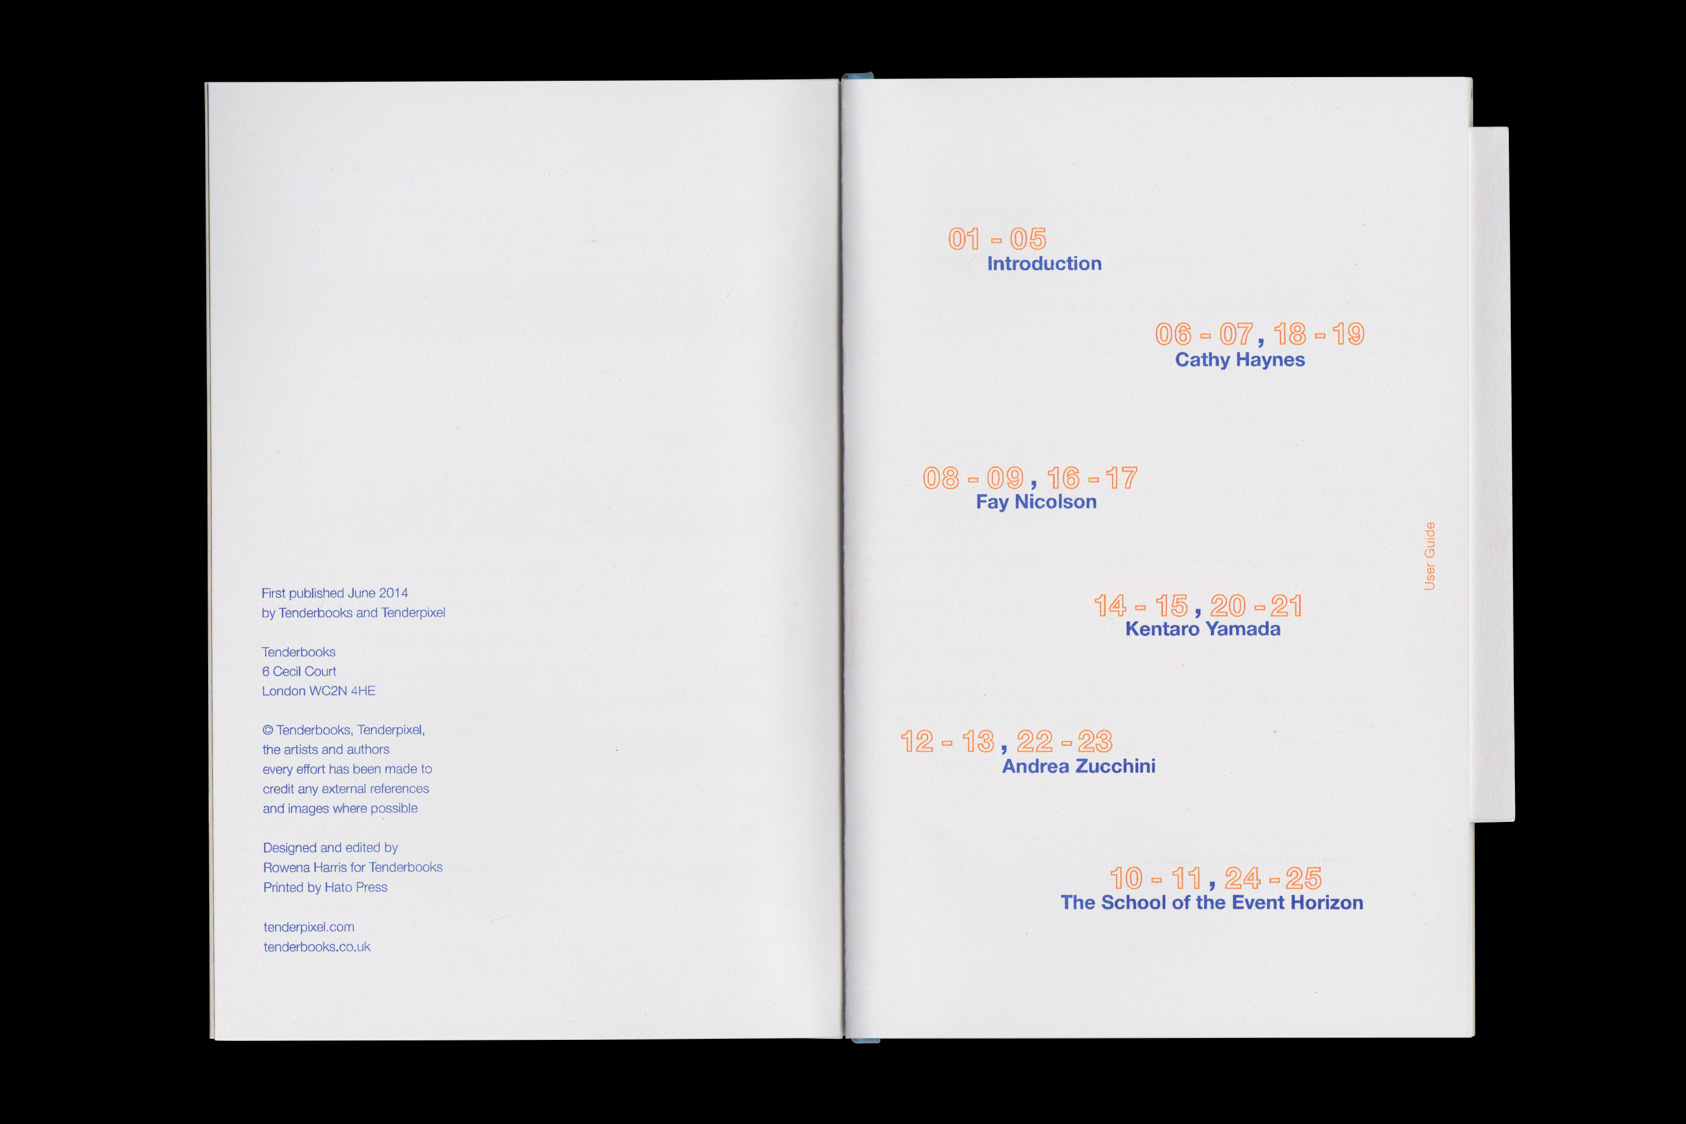 Point of Divergence - publication for Tenderbooks, 2014 by the agency for emerging ideas